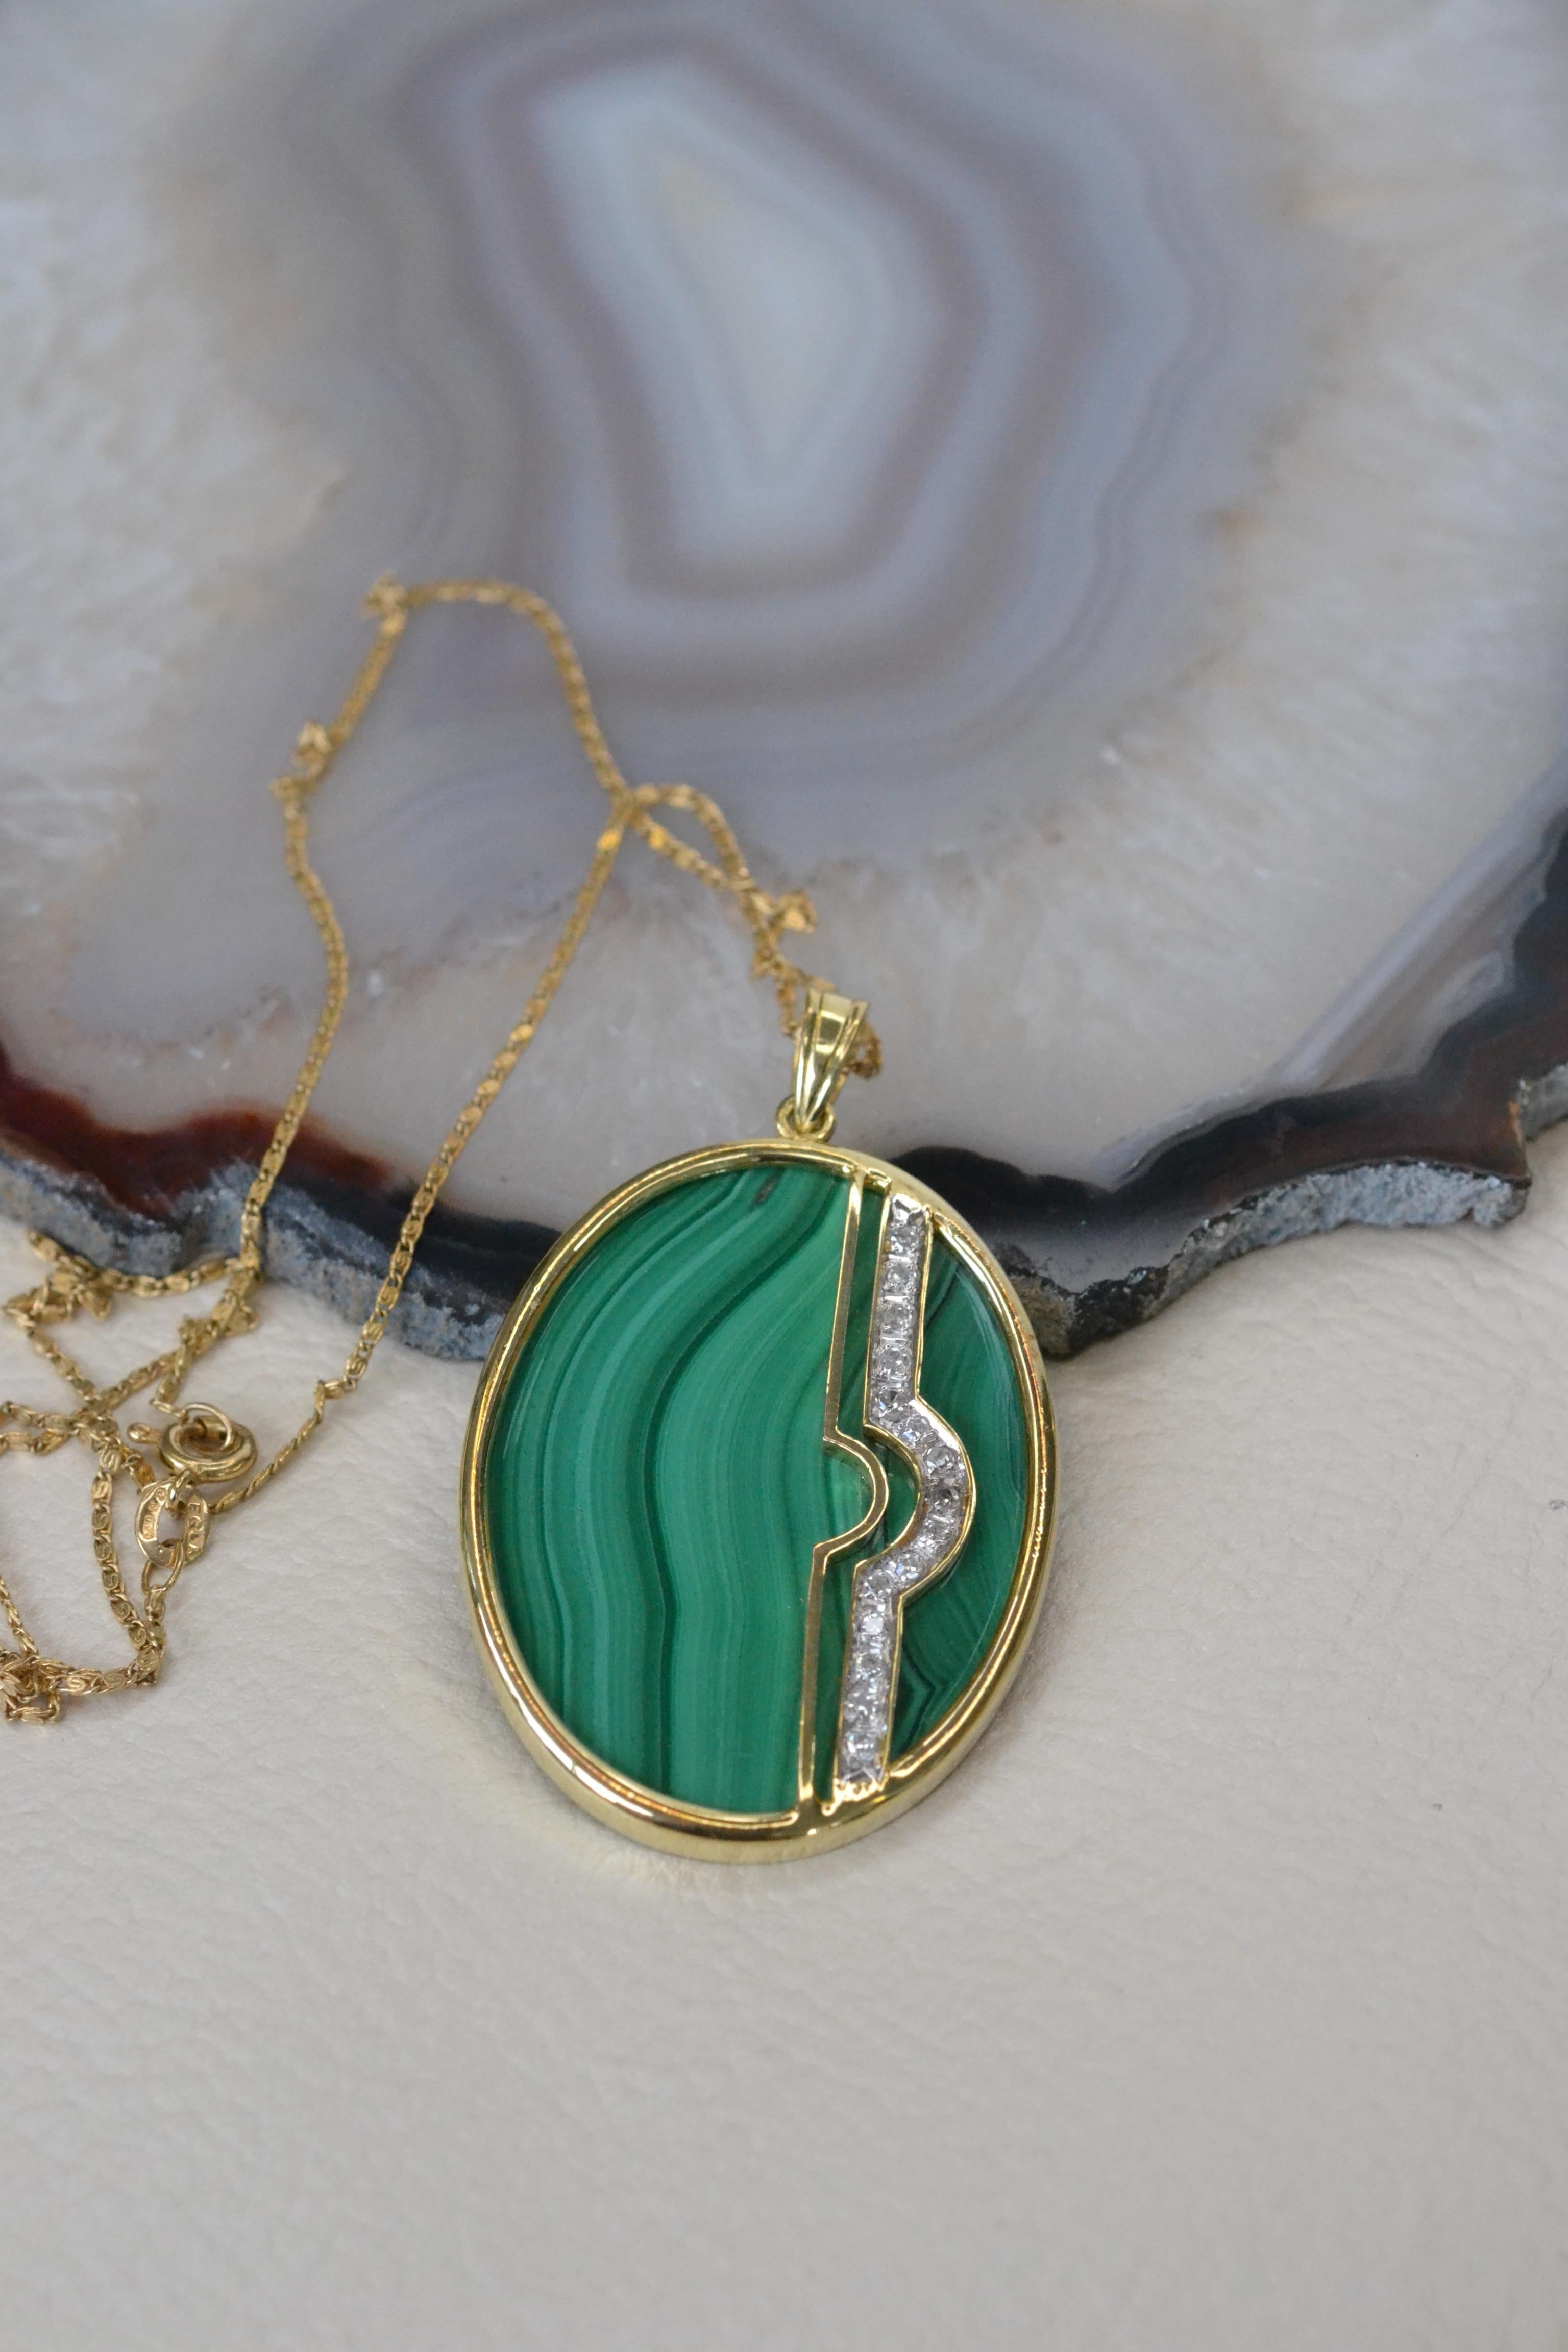 Vintage 14k Gold Malachite and Diamond Pendant

This unique malachite pendant made in the 1980s is the perfect statement necklace: bright, bold and sparkly. The stripe of white diamonds add an extra dazzle to this eye-catching piece and this